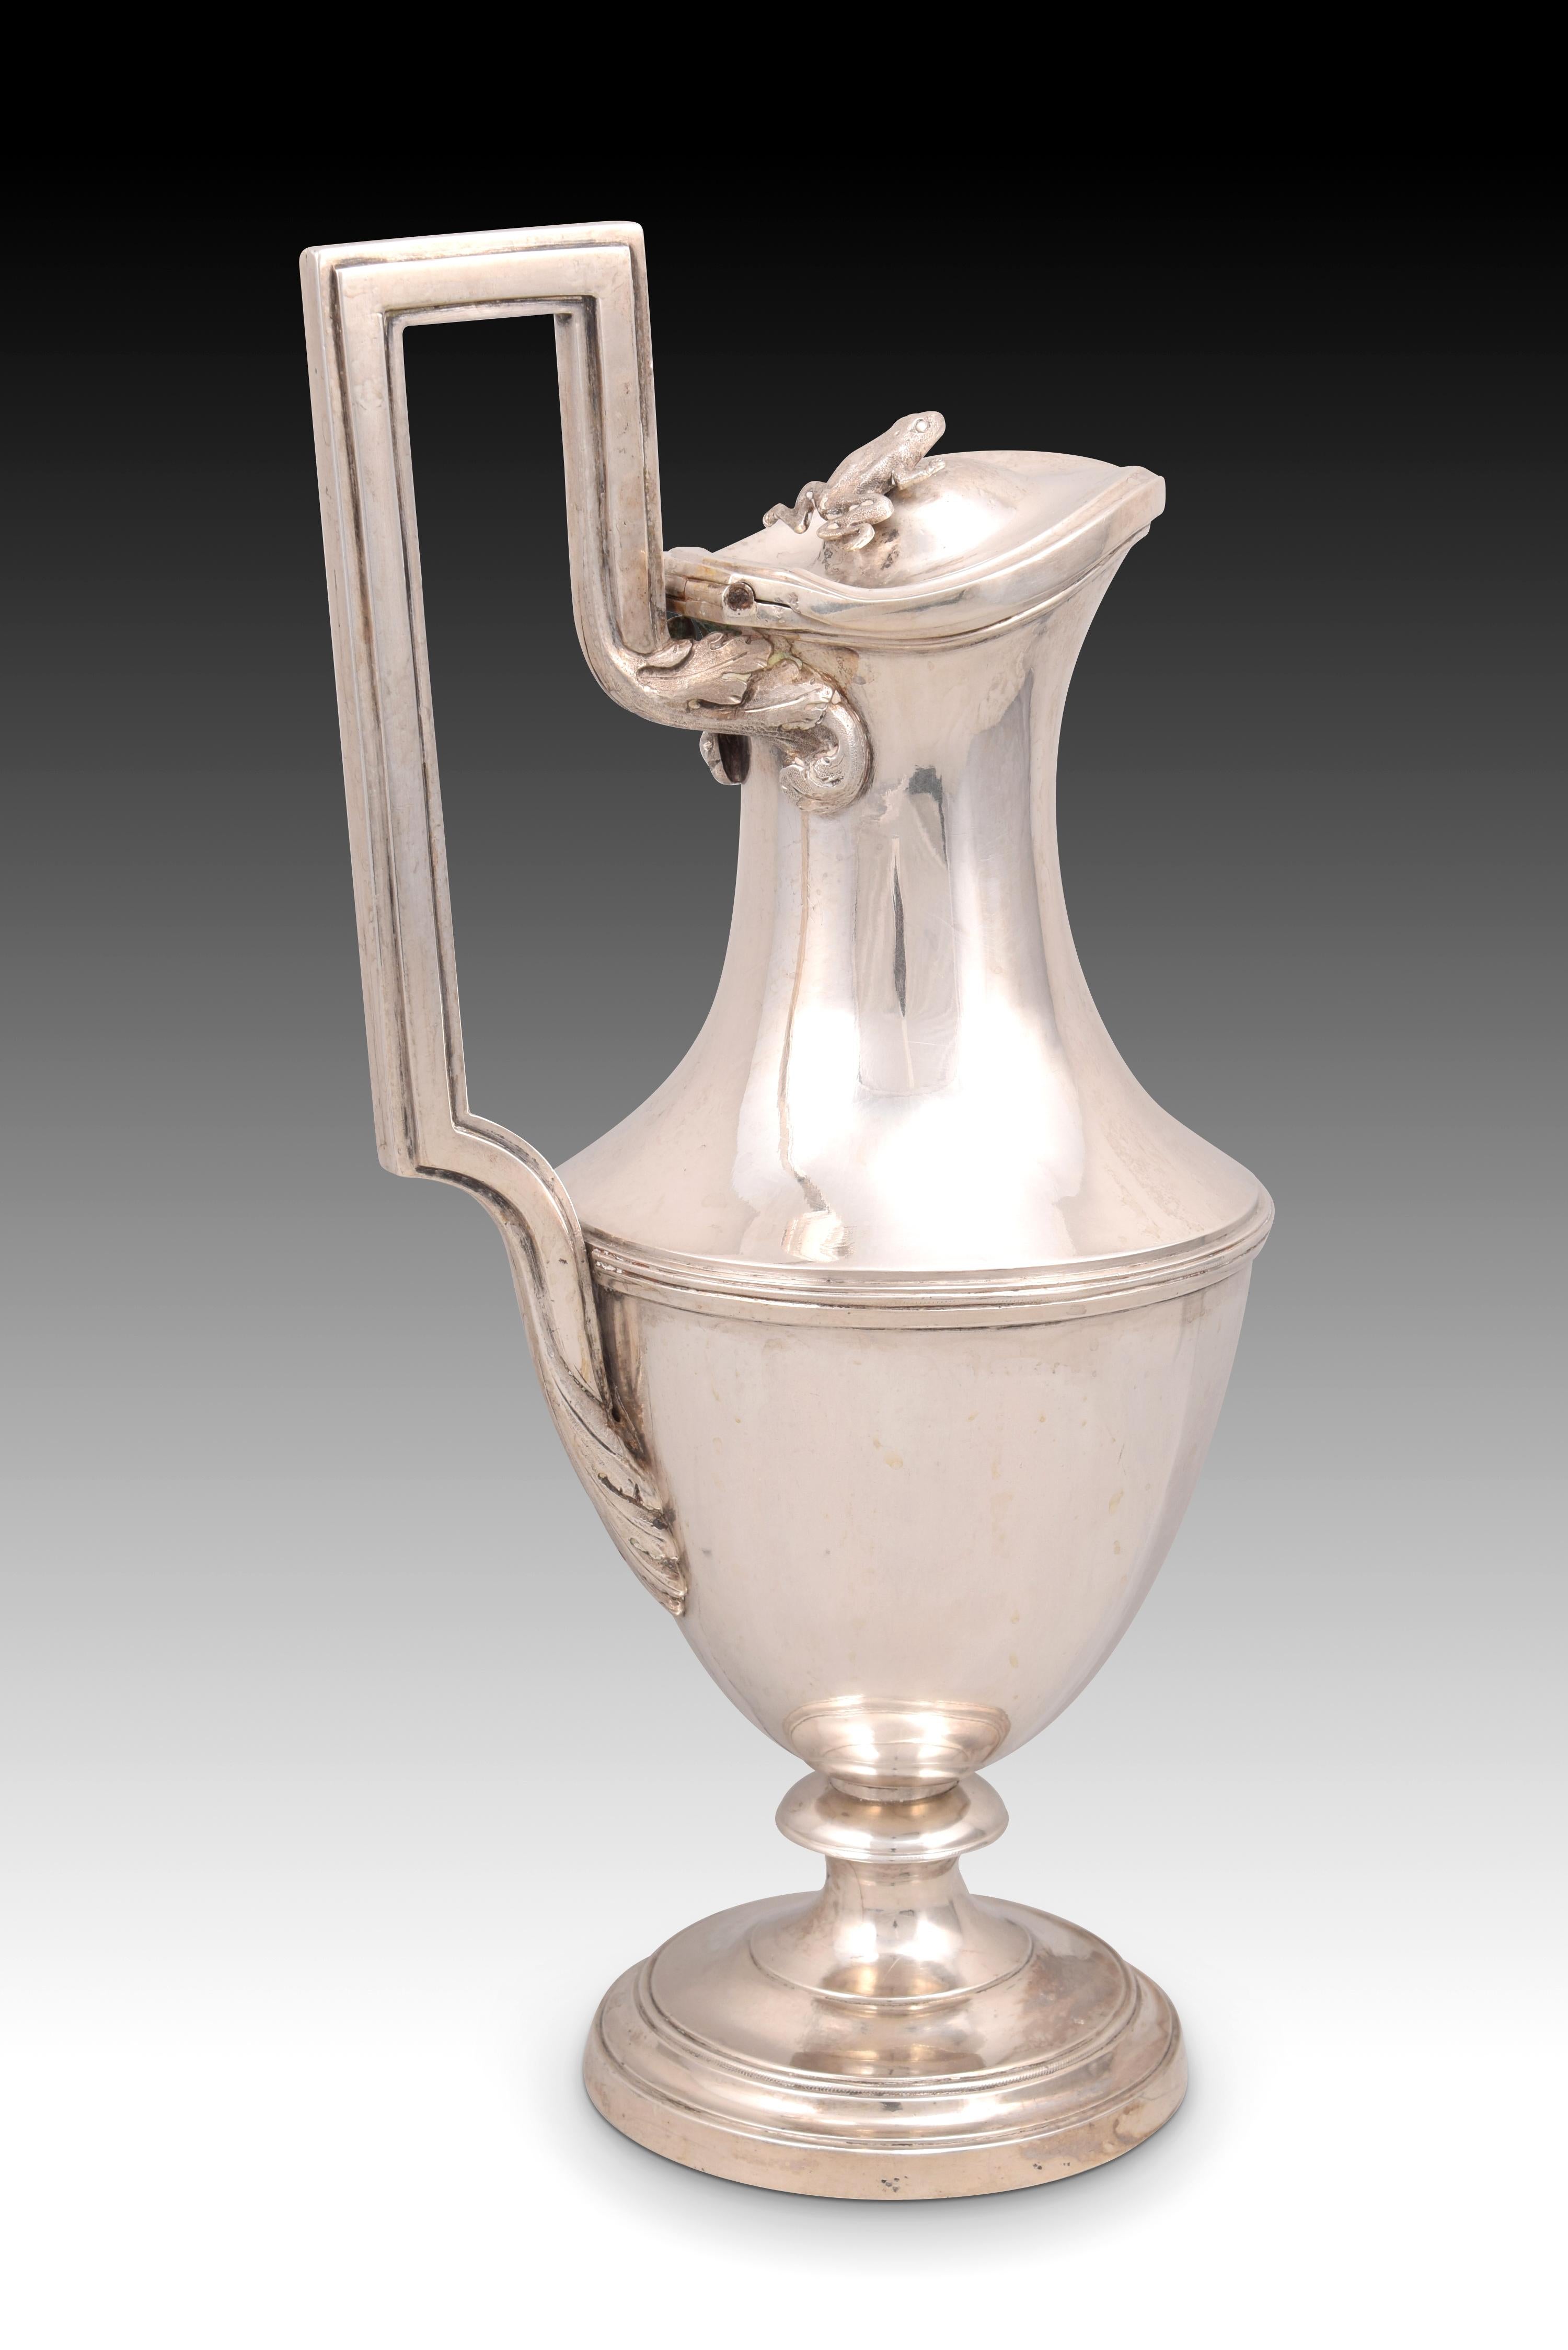 Jug. Silver. Madrid, Spain, 1803. With contrast markings. 
Published Encyclopedia of Spanish and Viceregal American silver. Bibliography: Fernández, Alejandro; Munoa, Raphael; Rabasco, Jorge. 